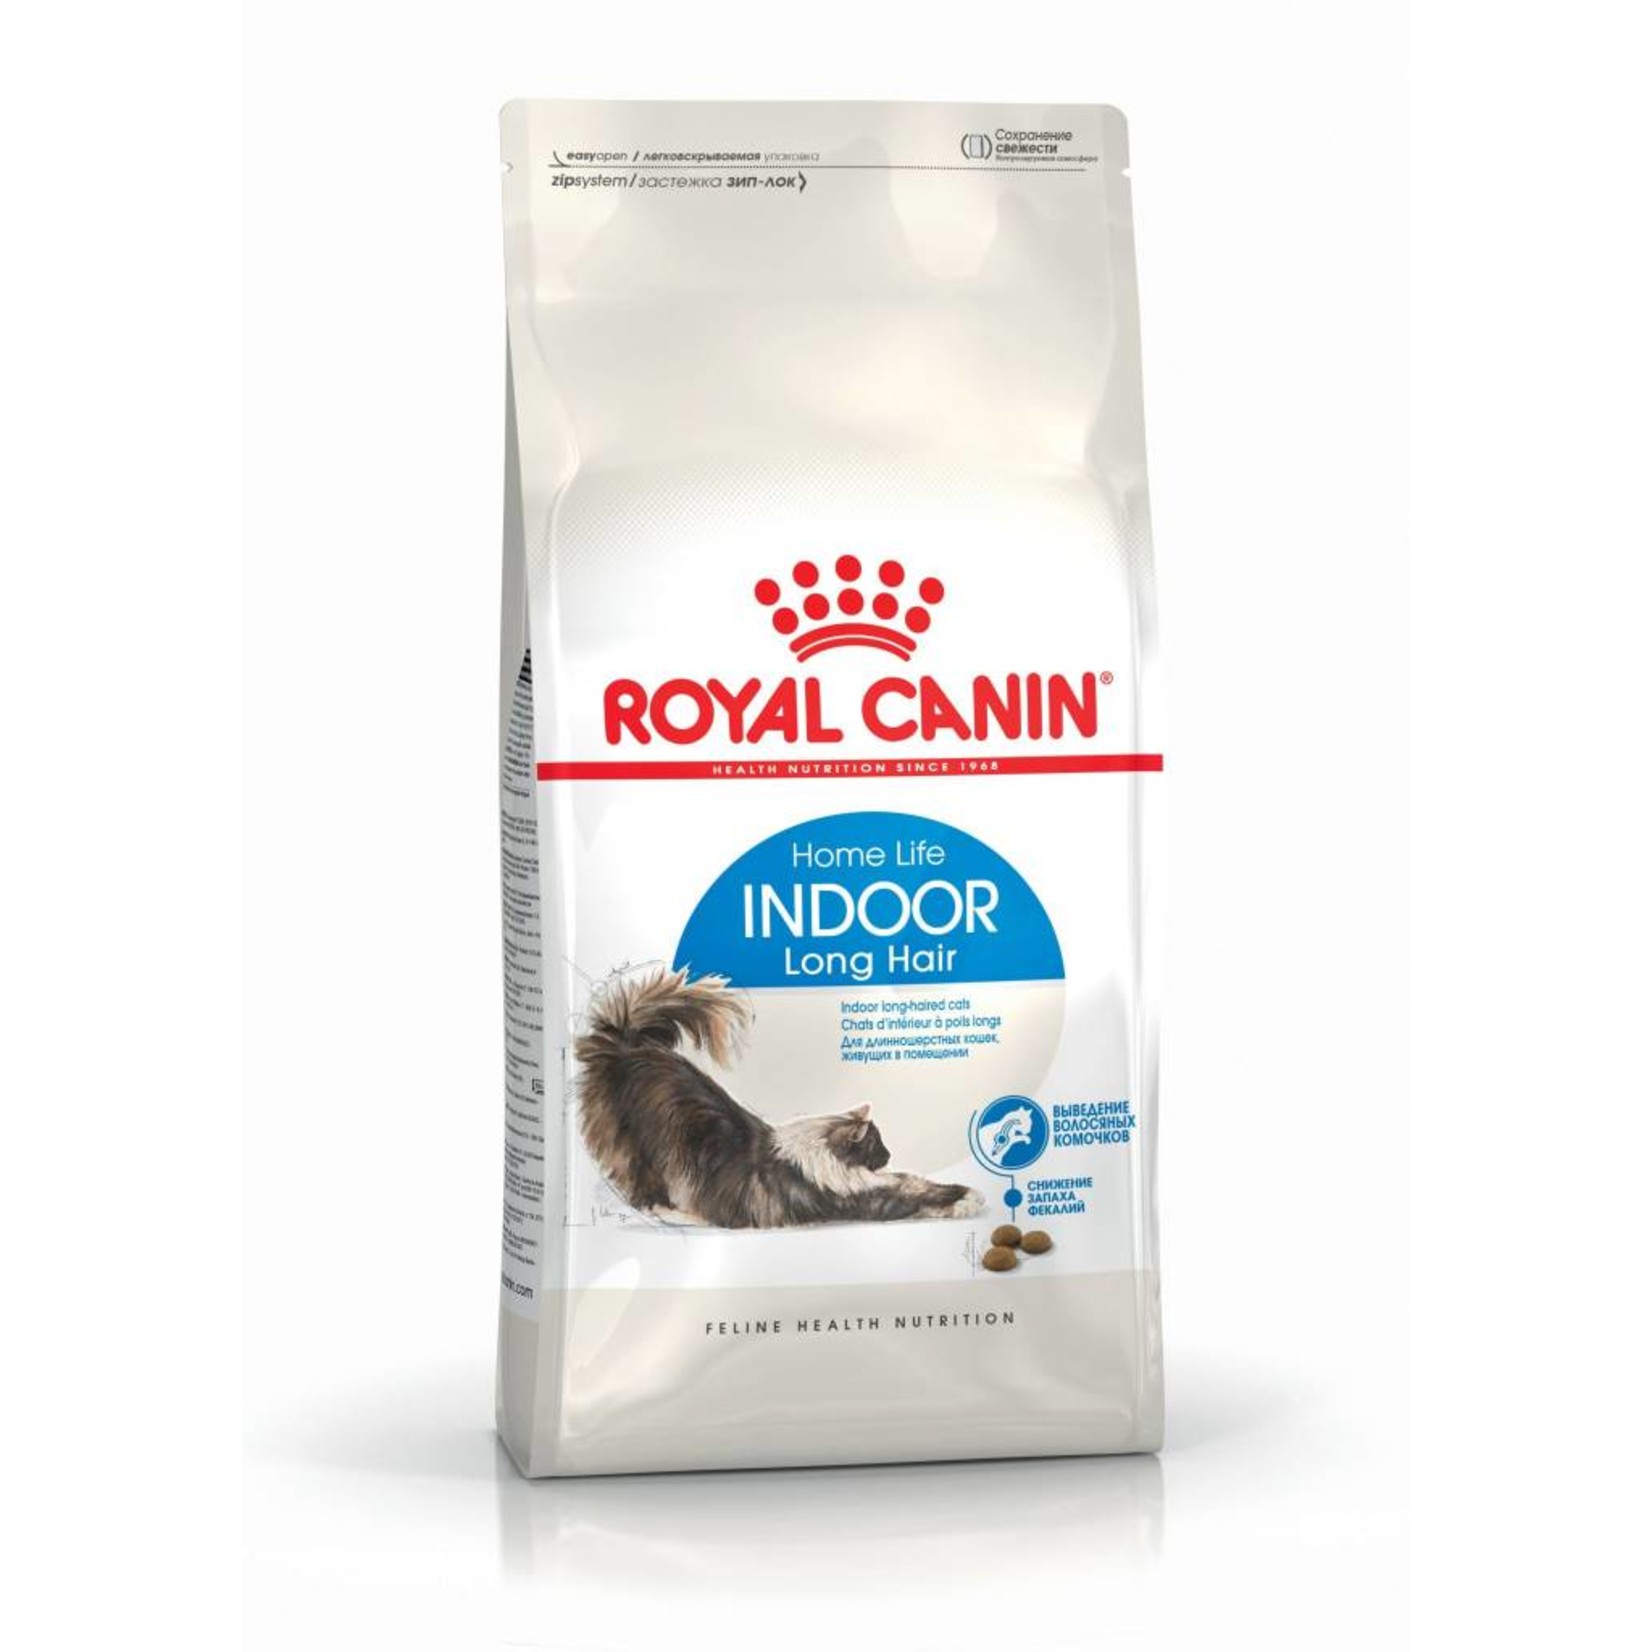 Royal Canin Indoor Long Hair Adult Cat Dry Food, 2kg